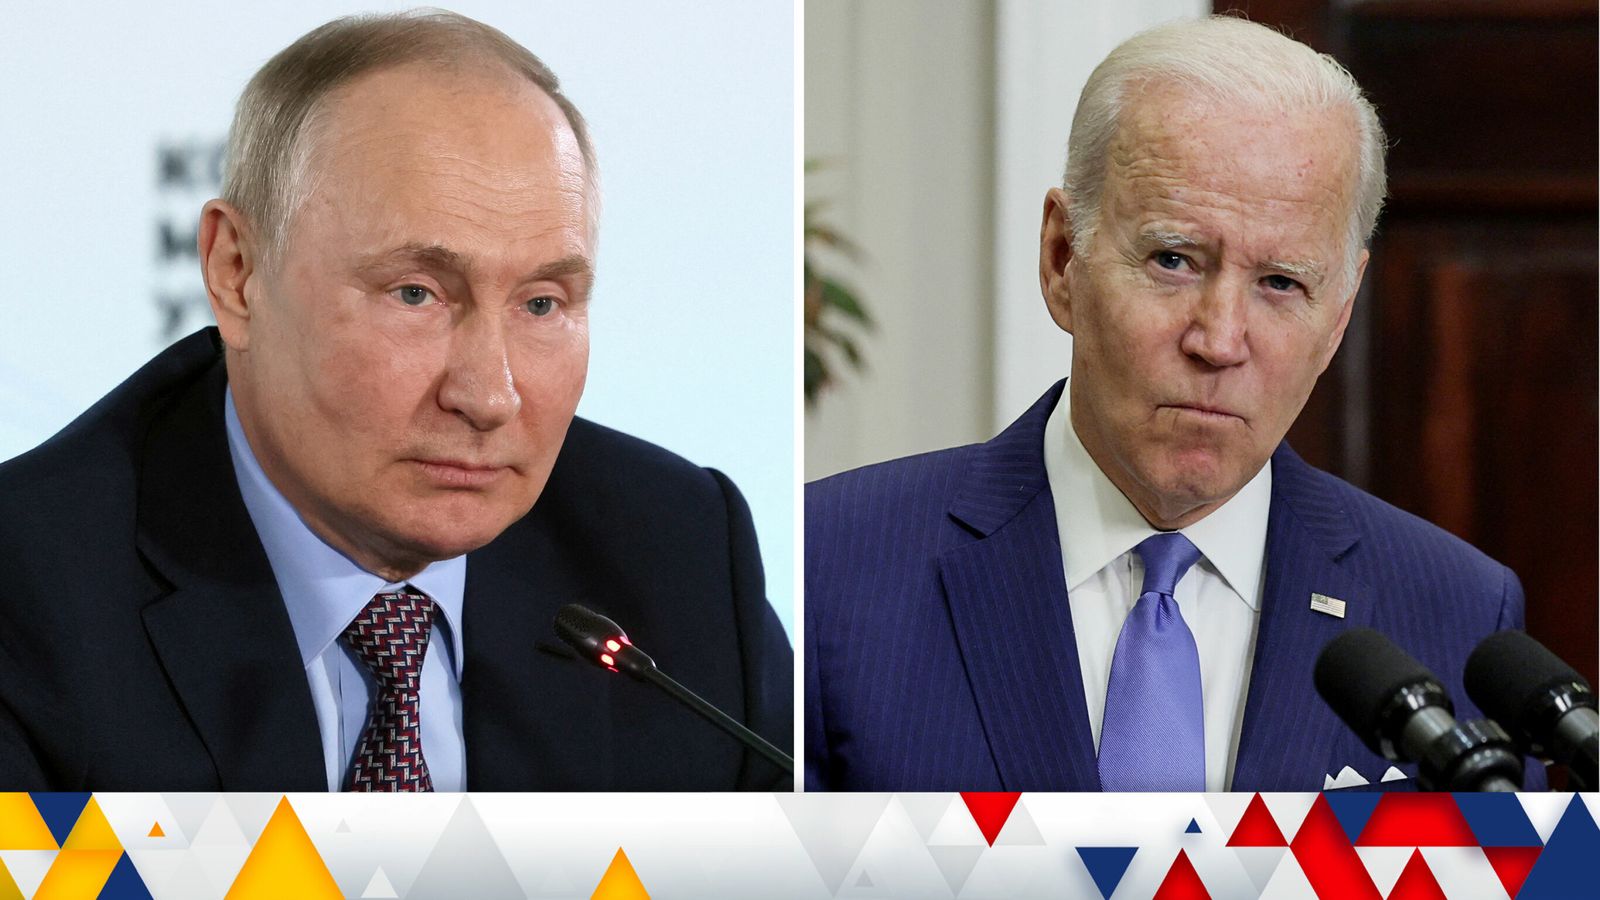 Joe Biden says Vladimir Putin has 'clearly committed war crimes' and says ICC's arrest warrant is 'justified'